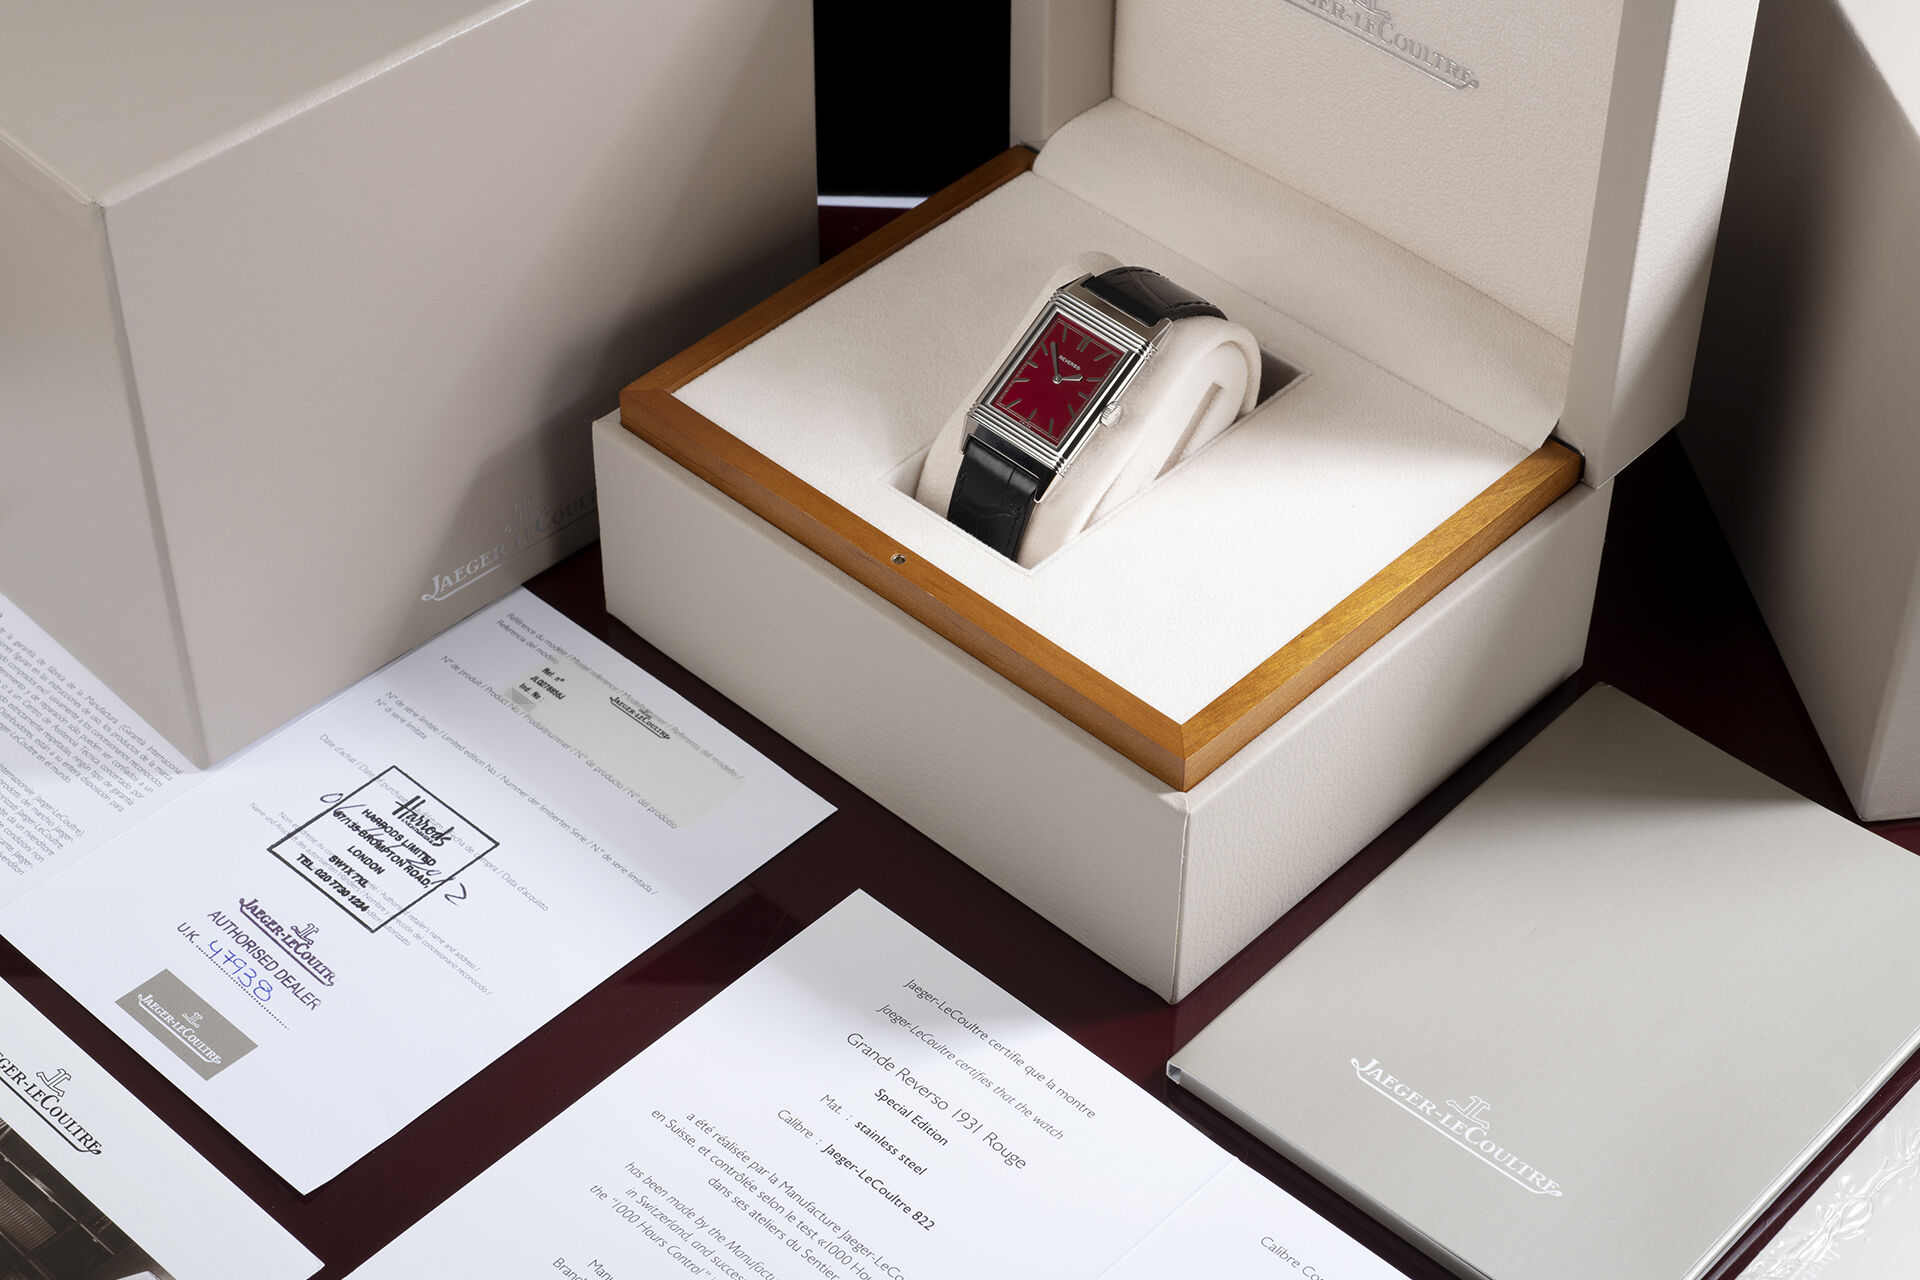 ref 277.8.62 | Special Edition | Jaeger-leCoultre Grande Reverso Special Edition Rouge Tribute 1931